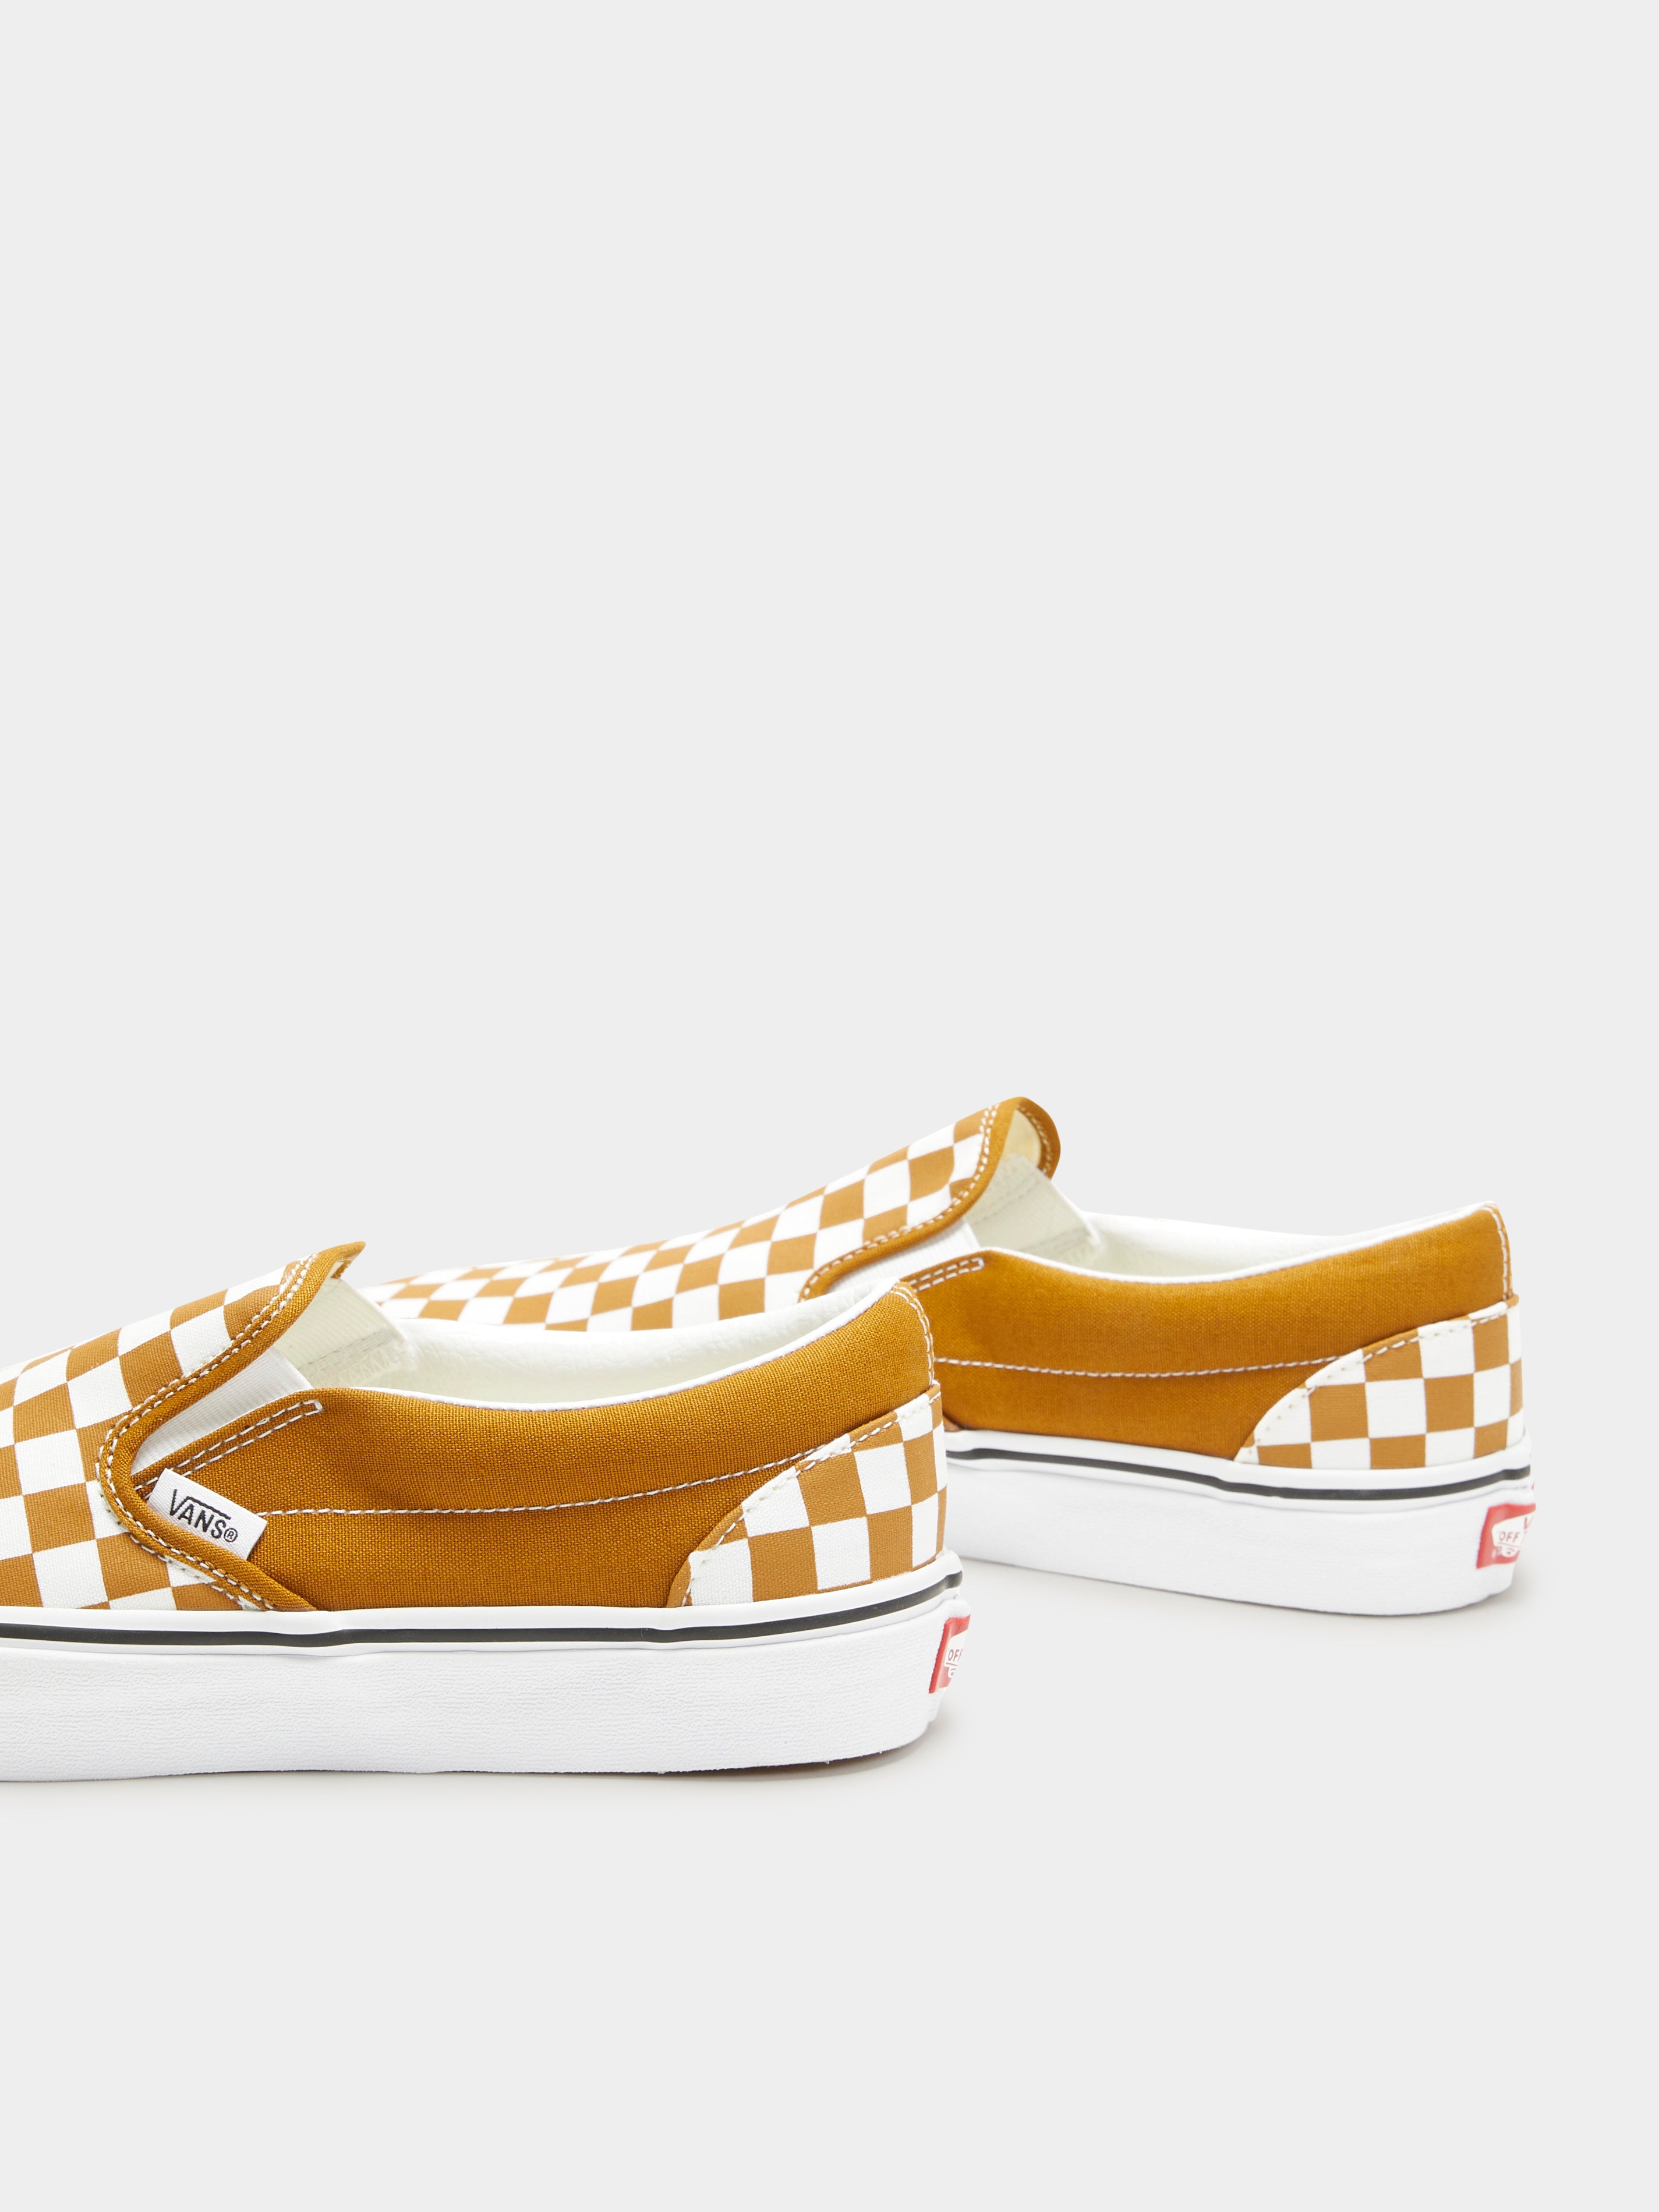 Unisex Color Theory Checkerboard Slip-On Sneakers in Golden Brown